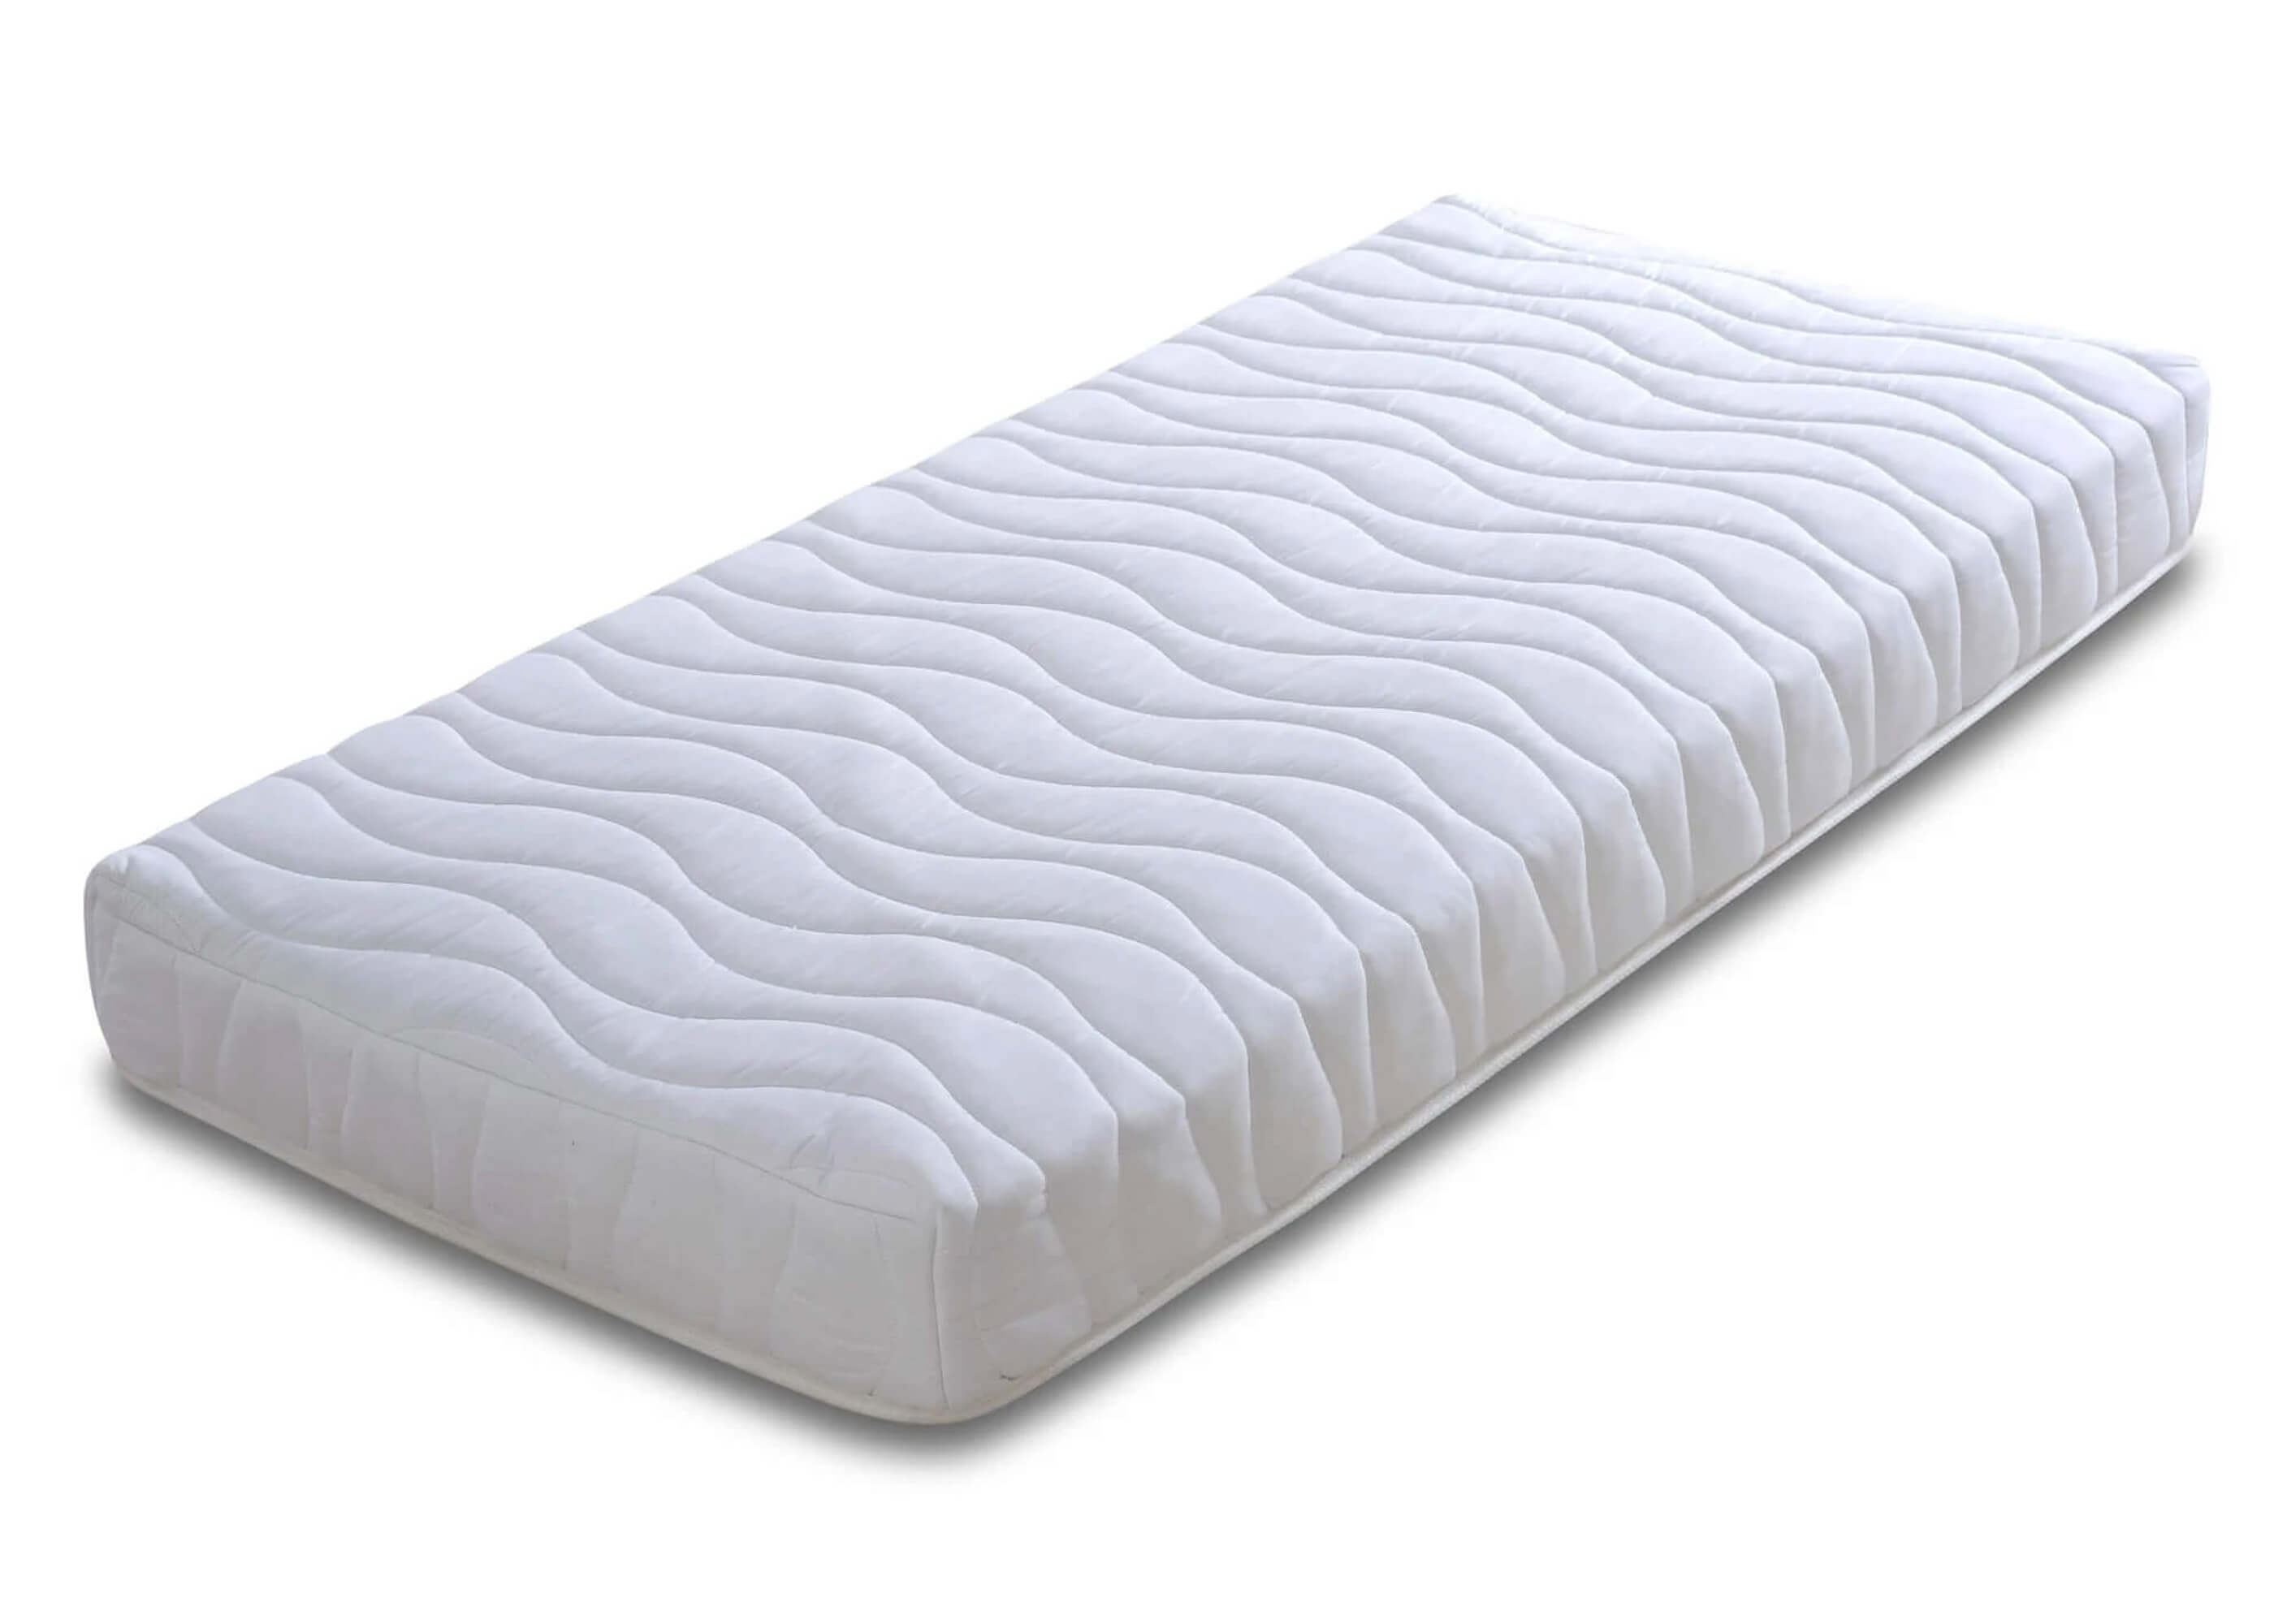 bunk bed mattress with memory foam